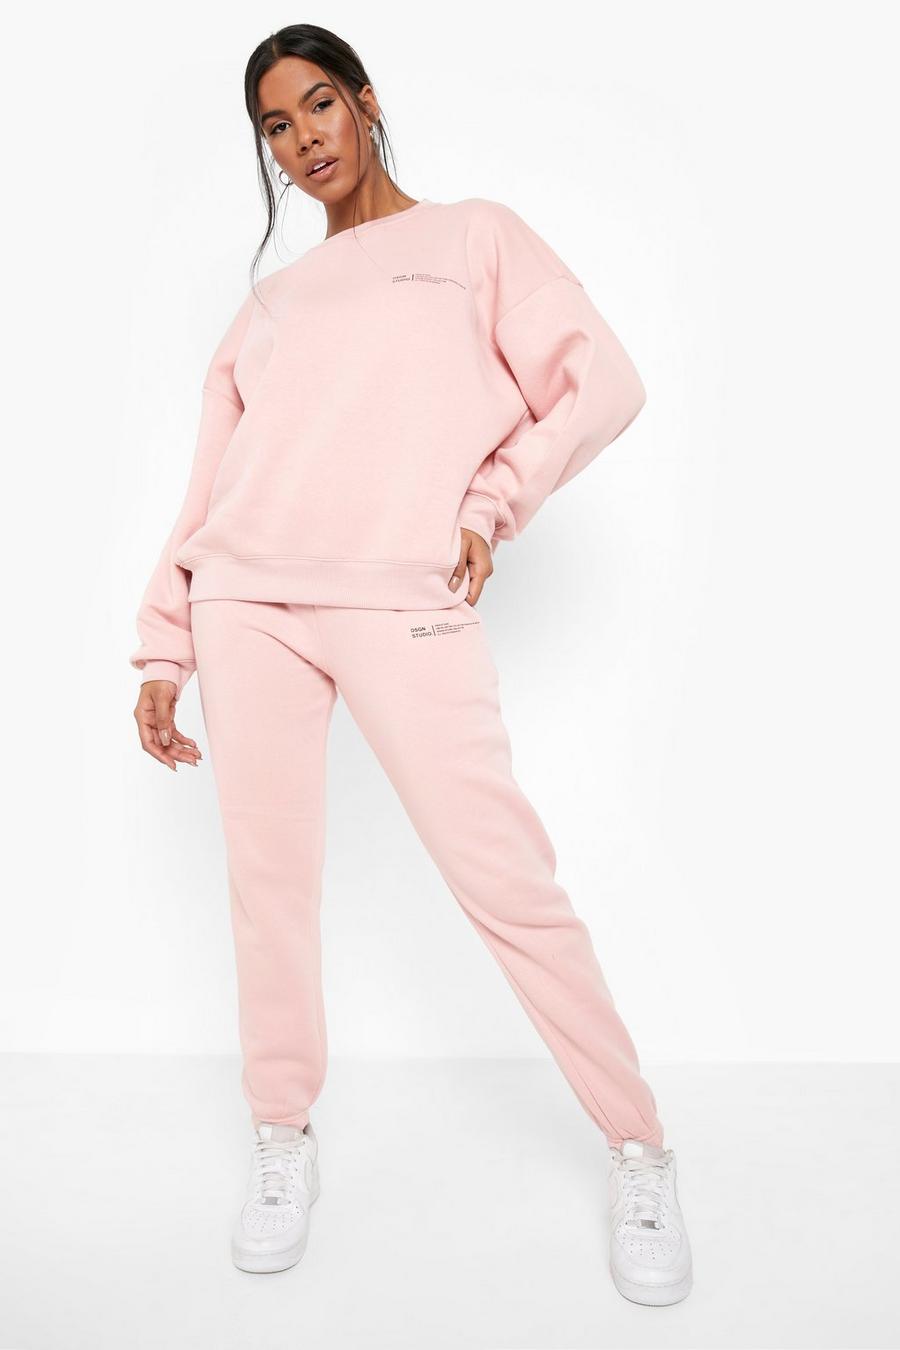 Dusky pink rose Dsgn Text Printed Sweater Tracksuit